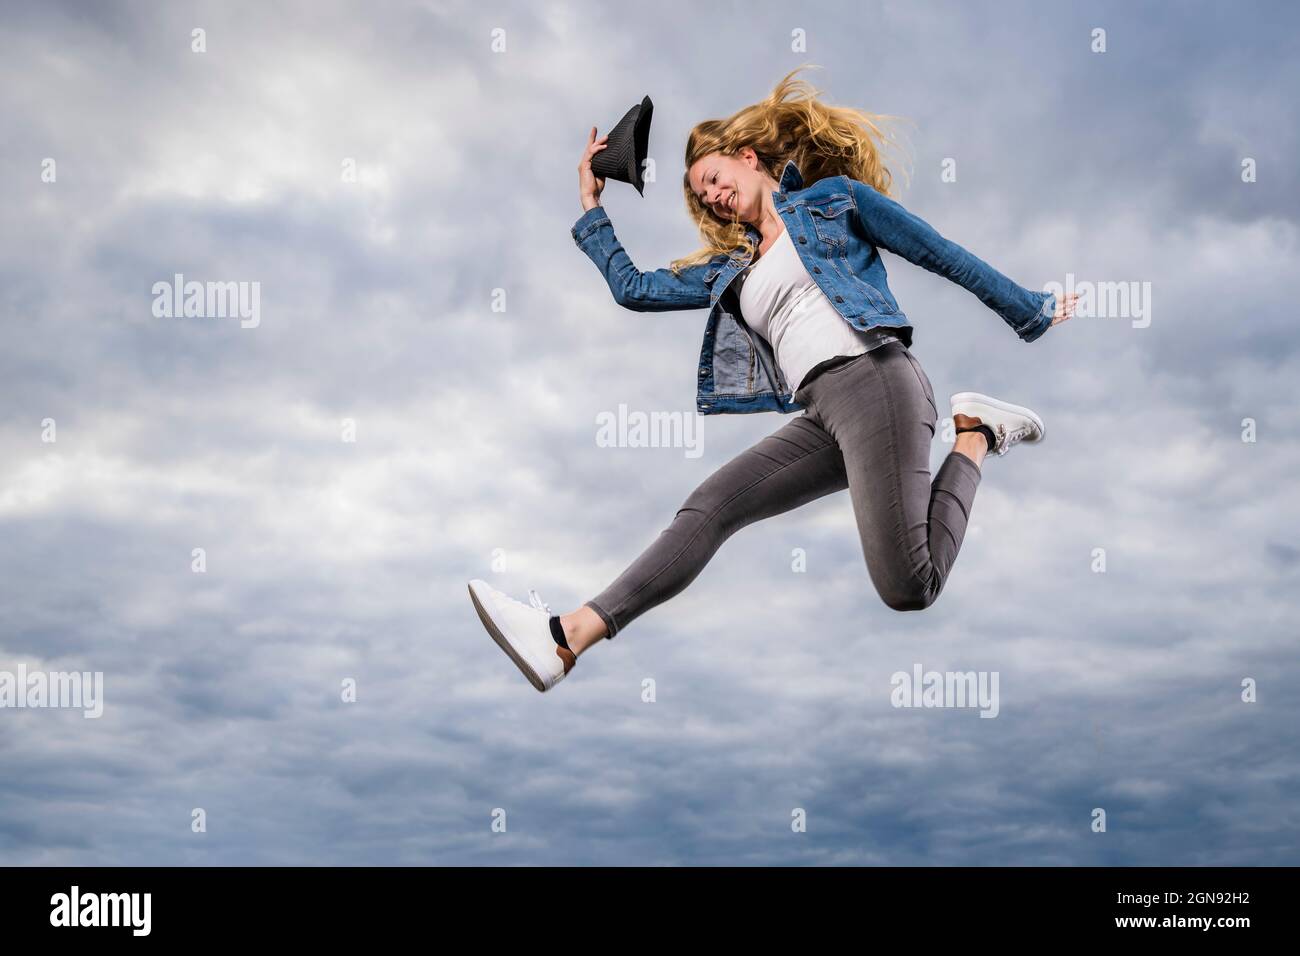 Young woman jumping against cloudy sky with hat in hand Stock Photo